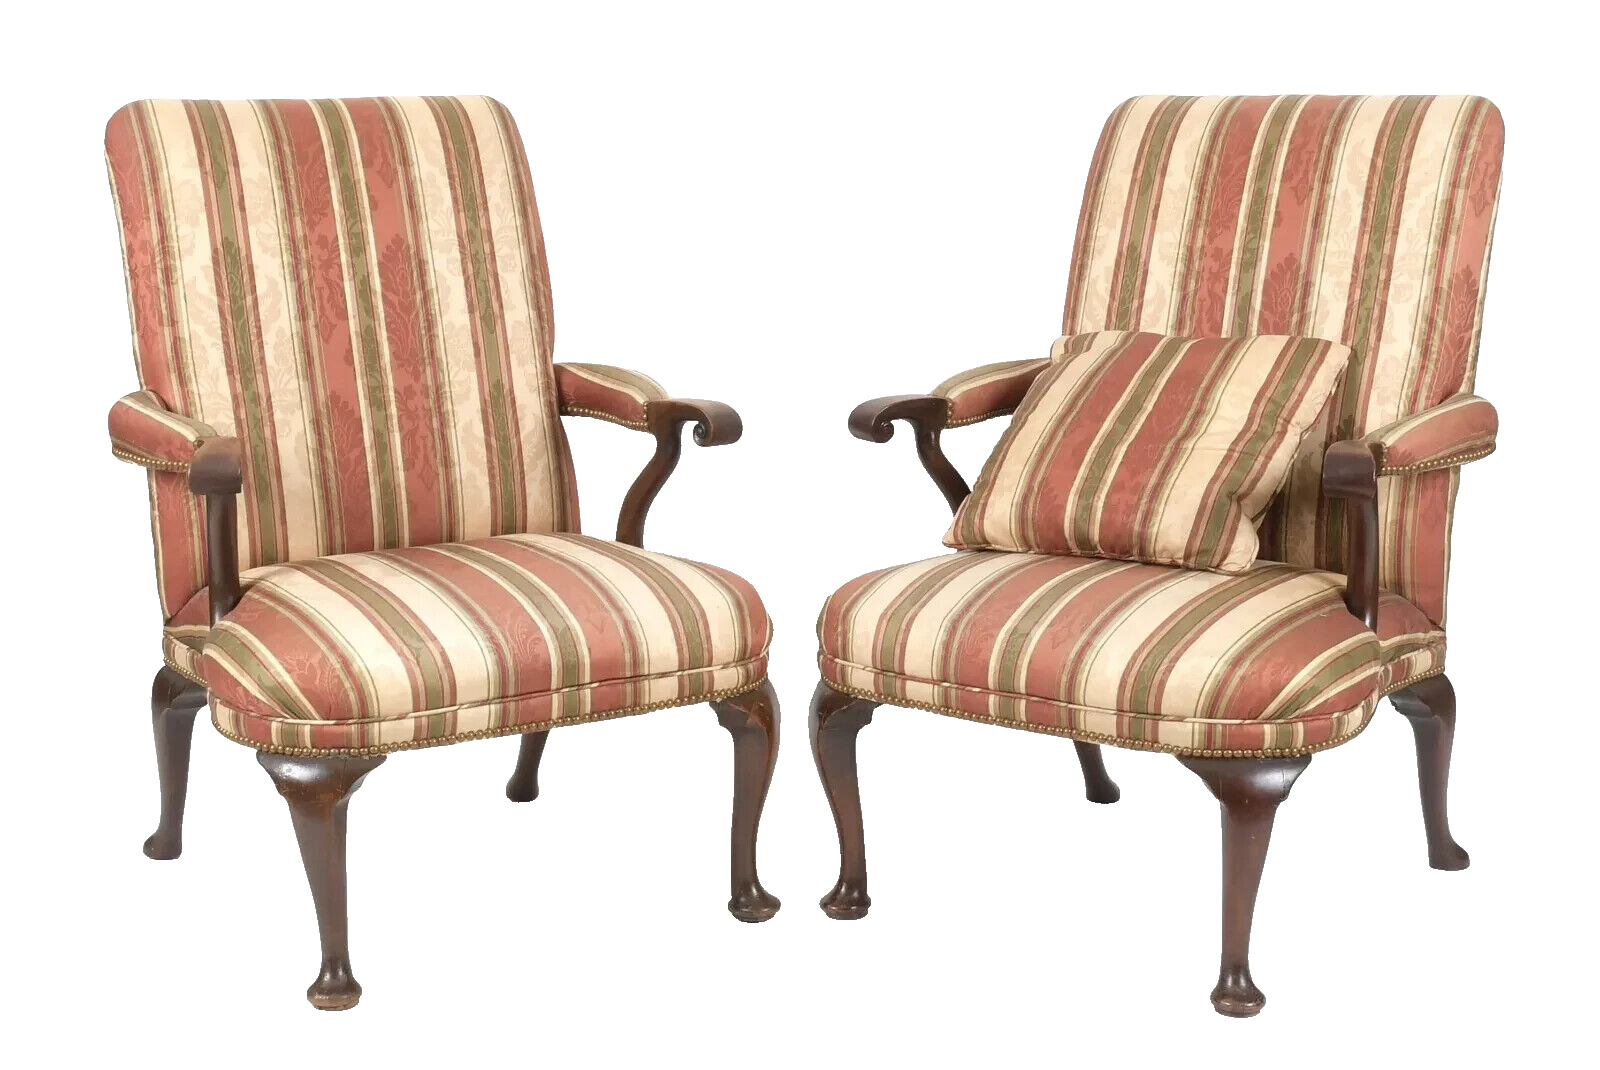 Pair of Georgian Queen Anne Style Mahogany Upholstered Arm Chairs Damask Fabric